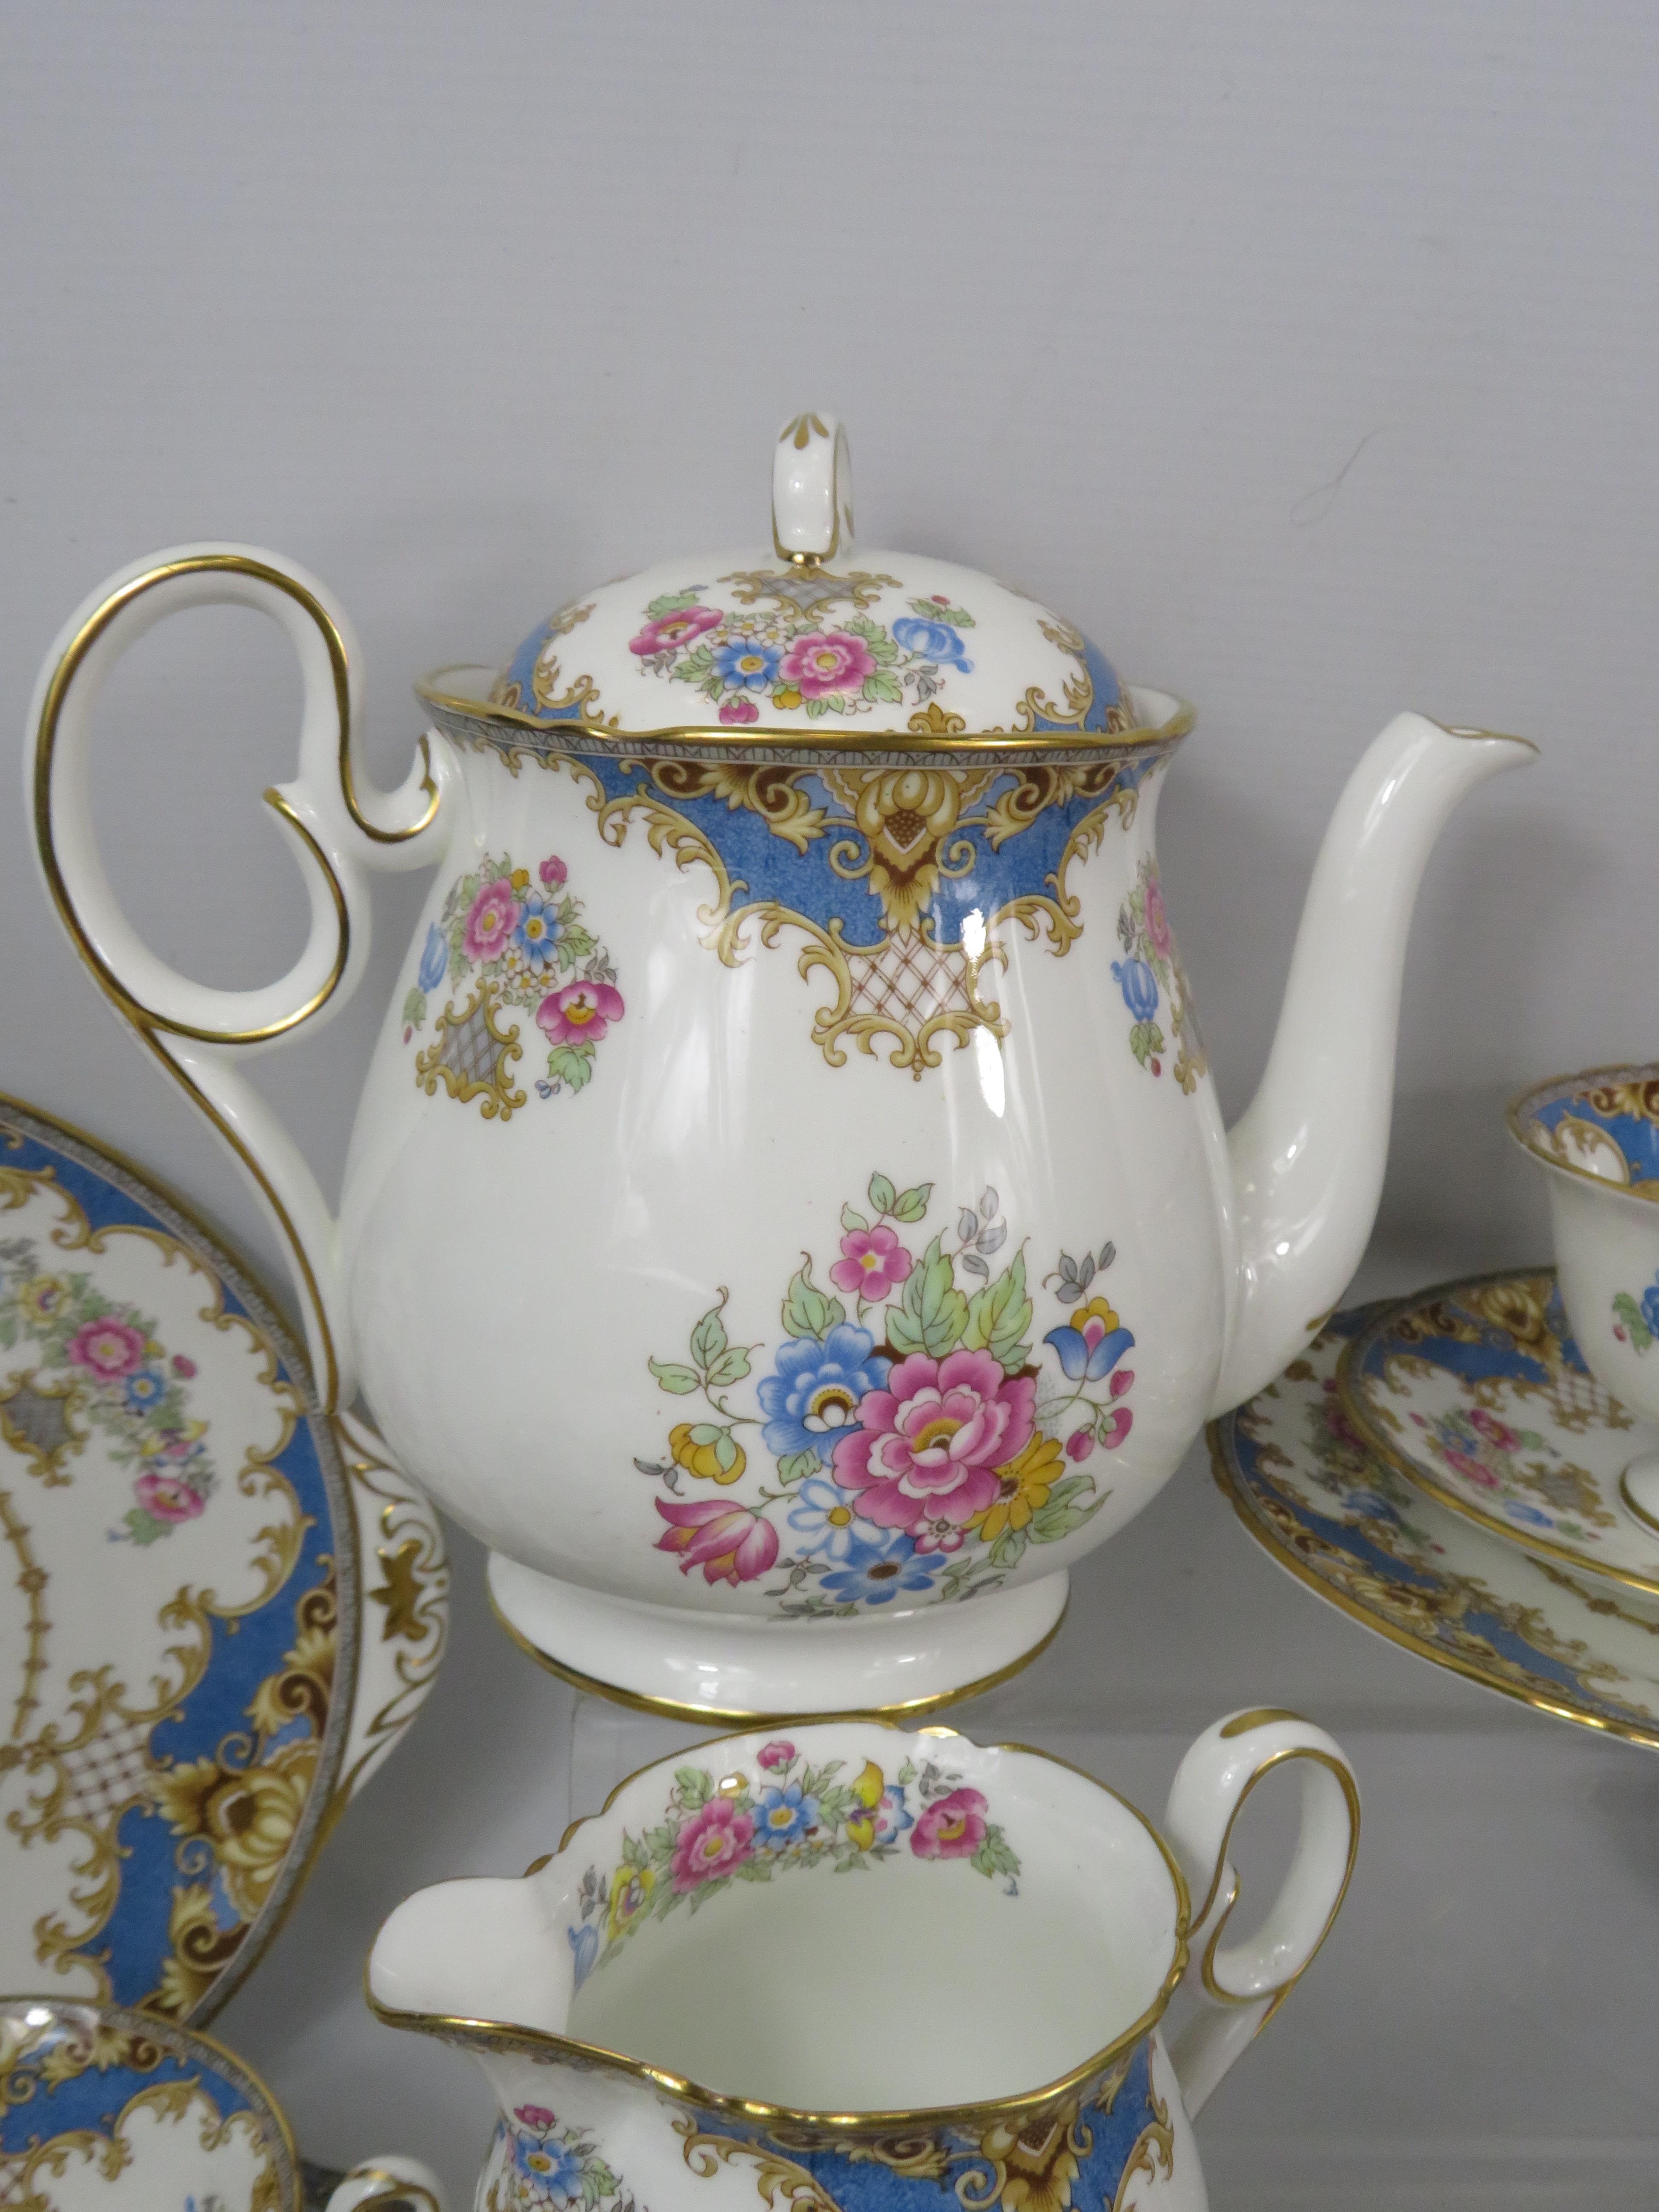 42 Pieces of Shelley Sheraton Teaset, 2 cake plates, Teapot, 12 cups, saucers and side plates plus - Image 7 of 8